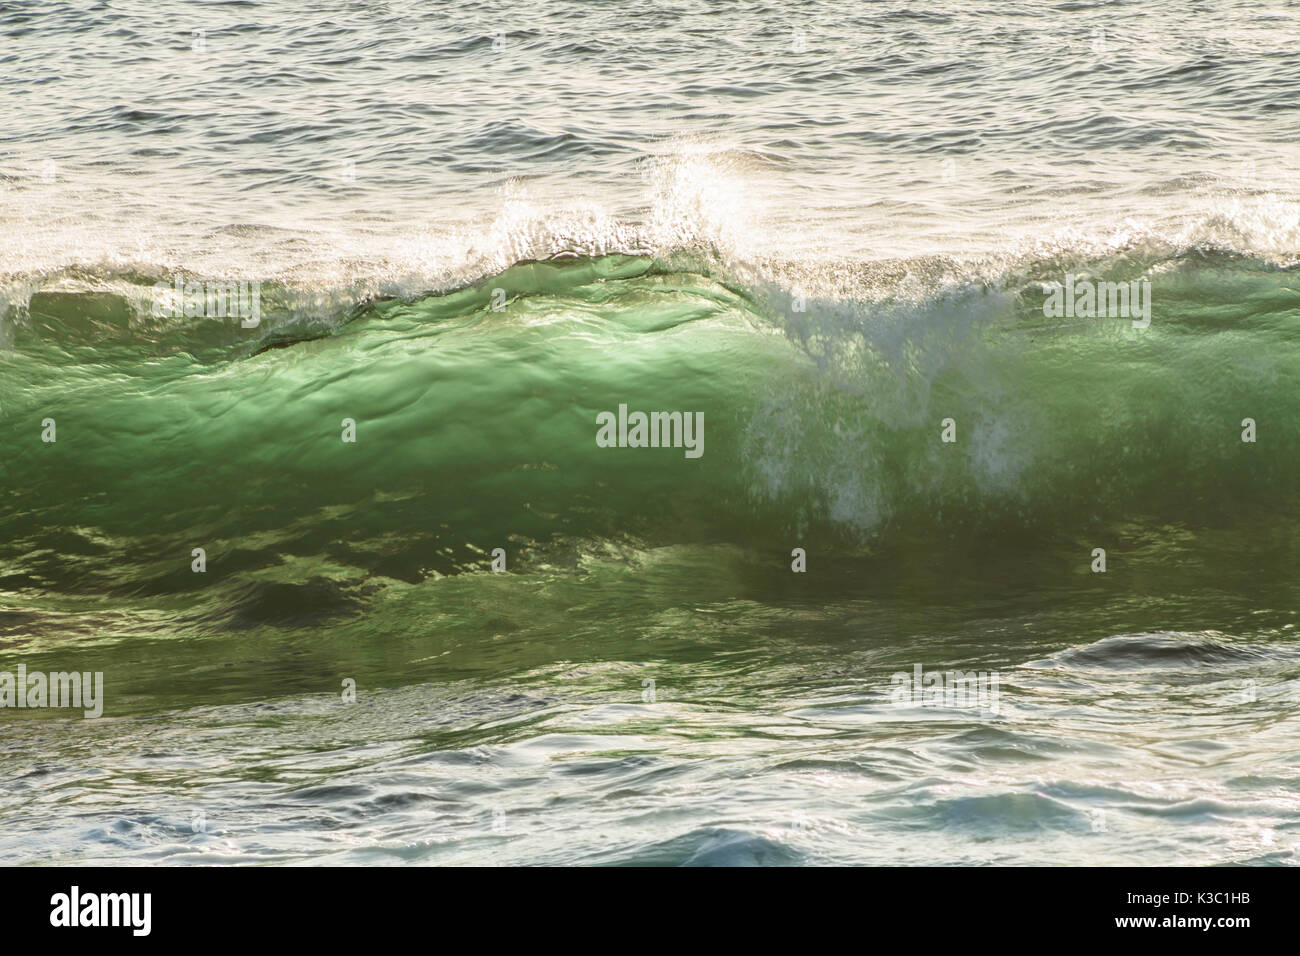 Sea wave close up with transparent green water and bright sunset light Stock Photo